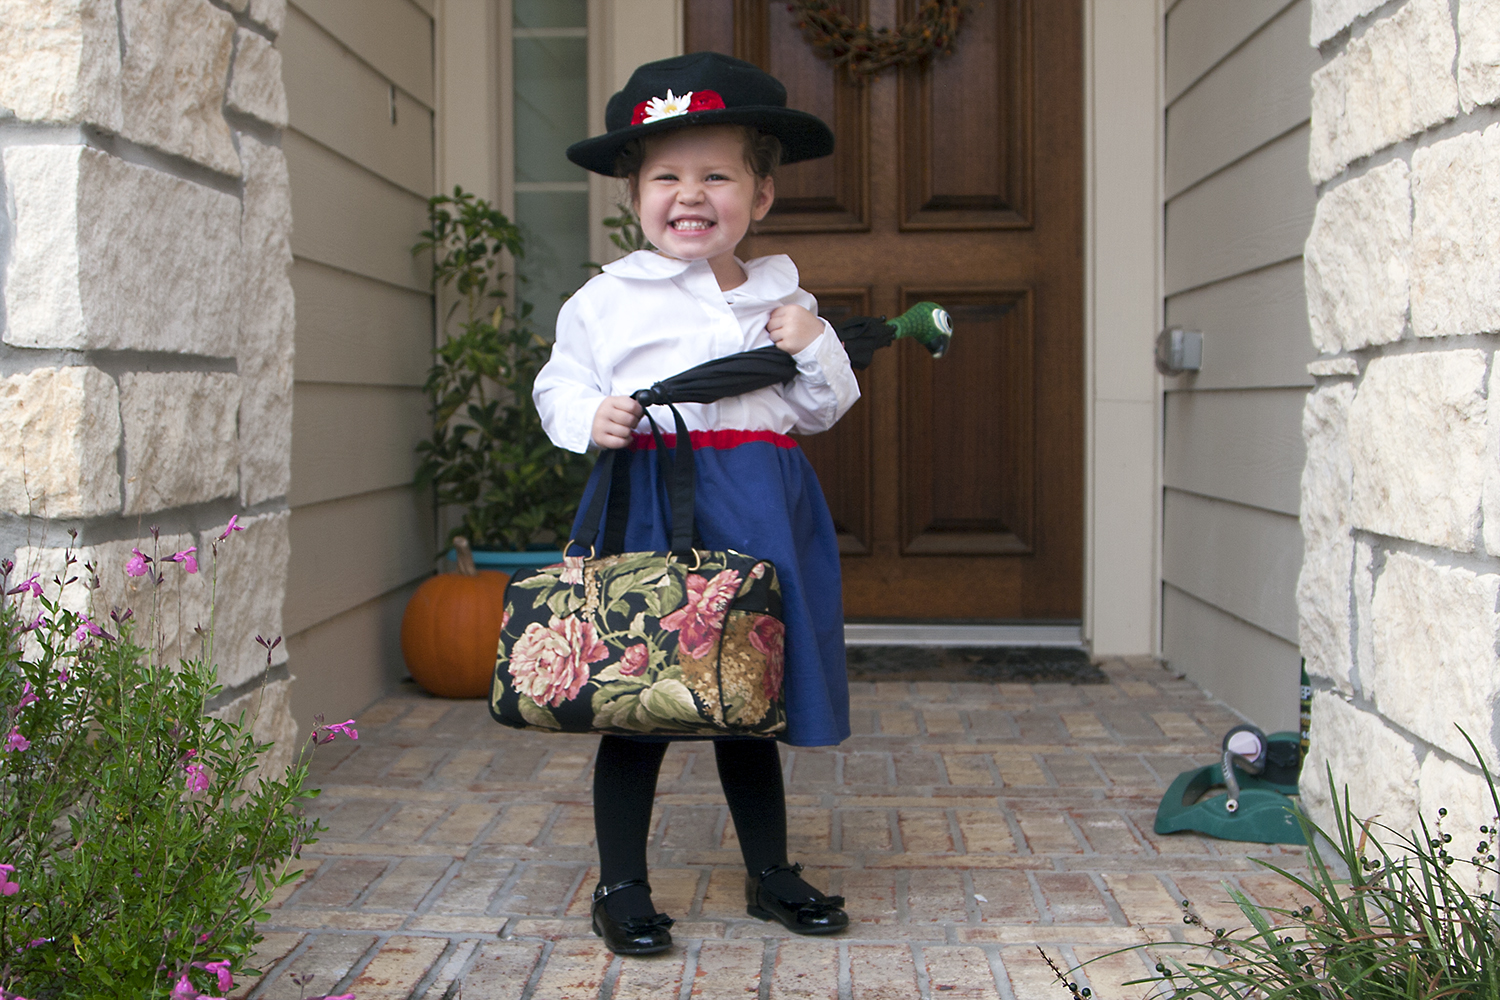 A girl dressed in Mary Poppins costume